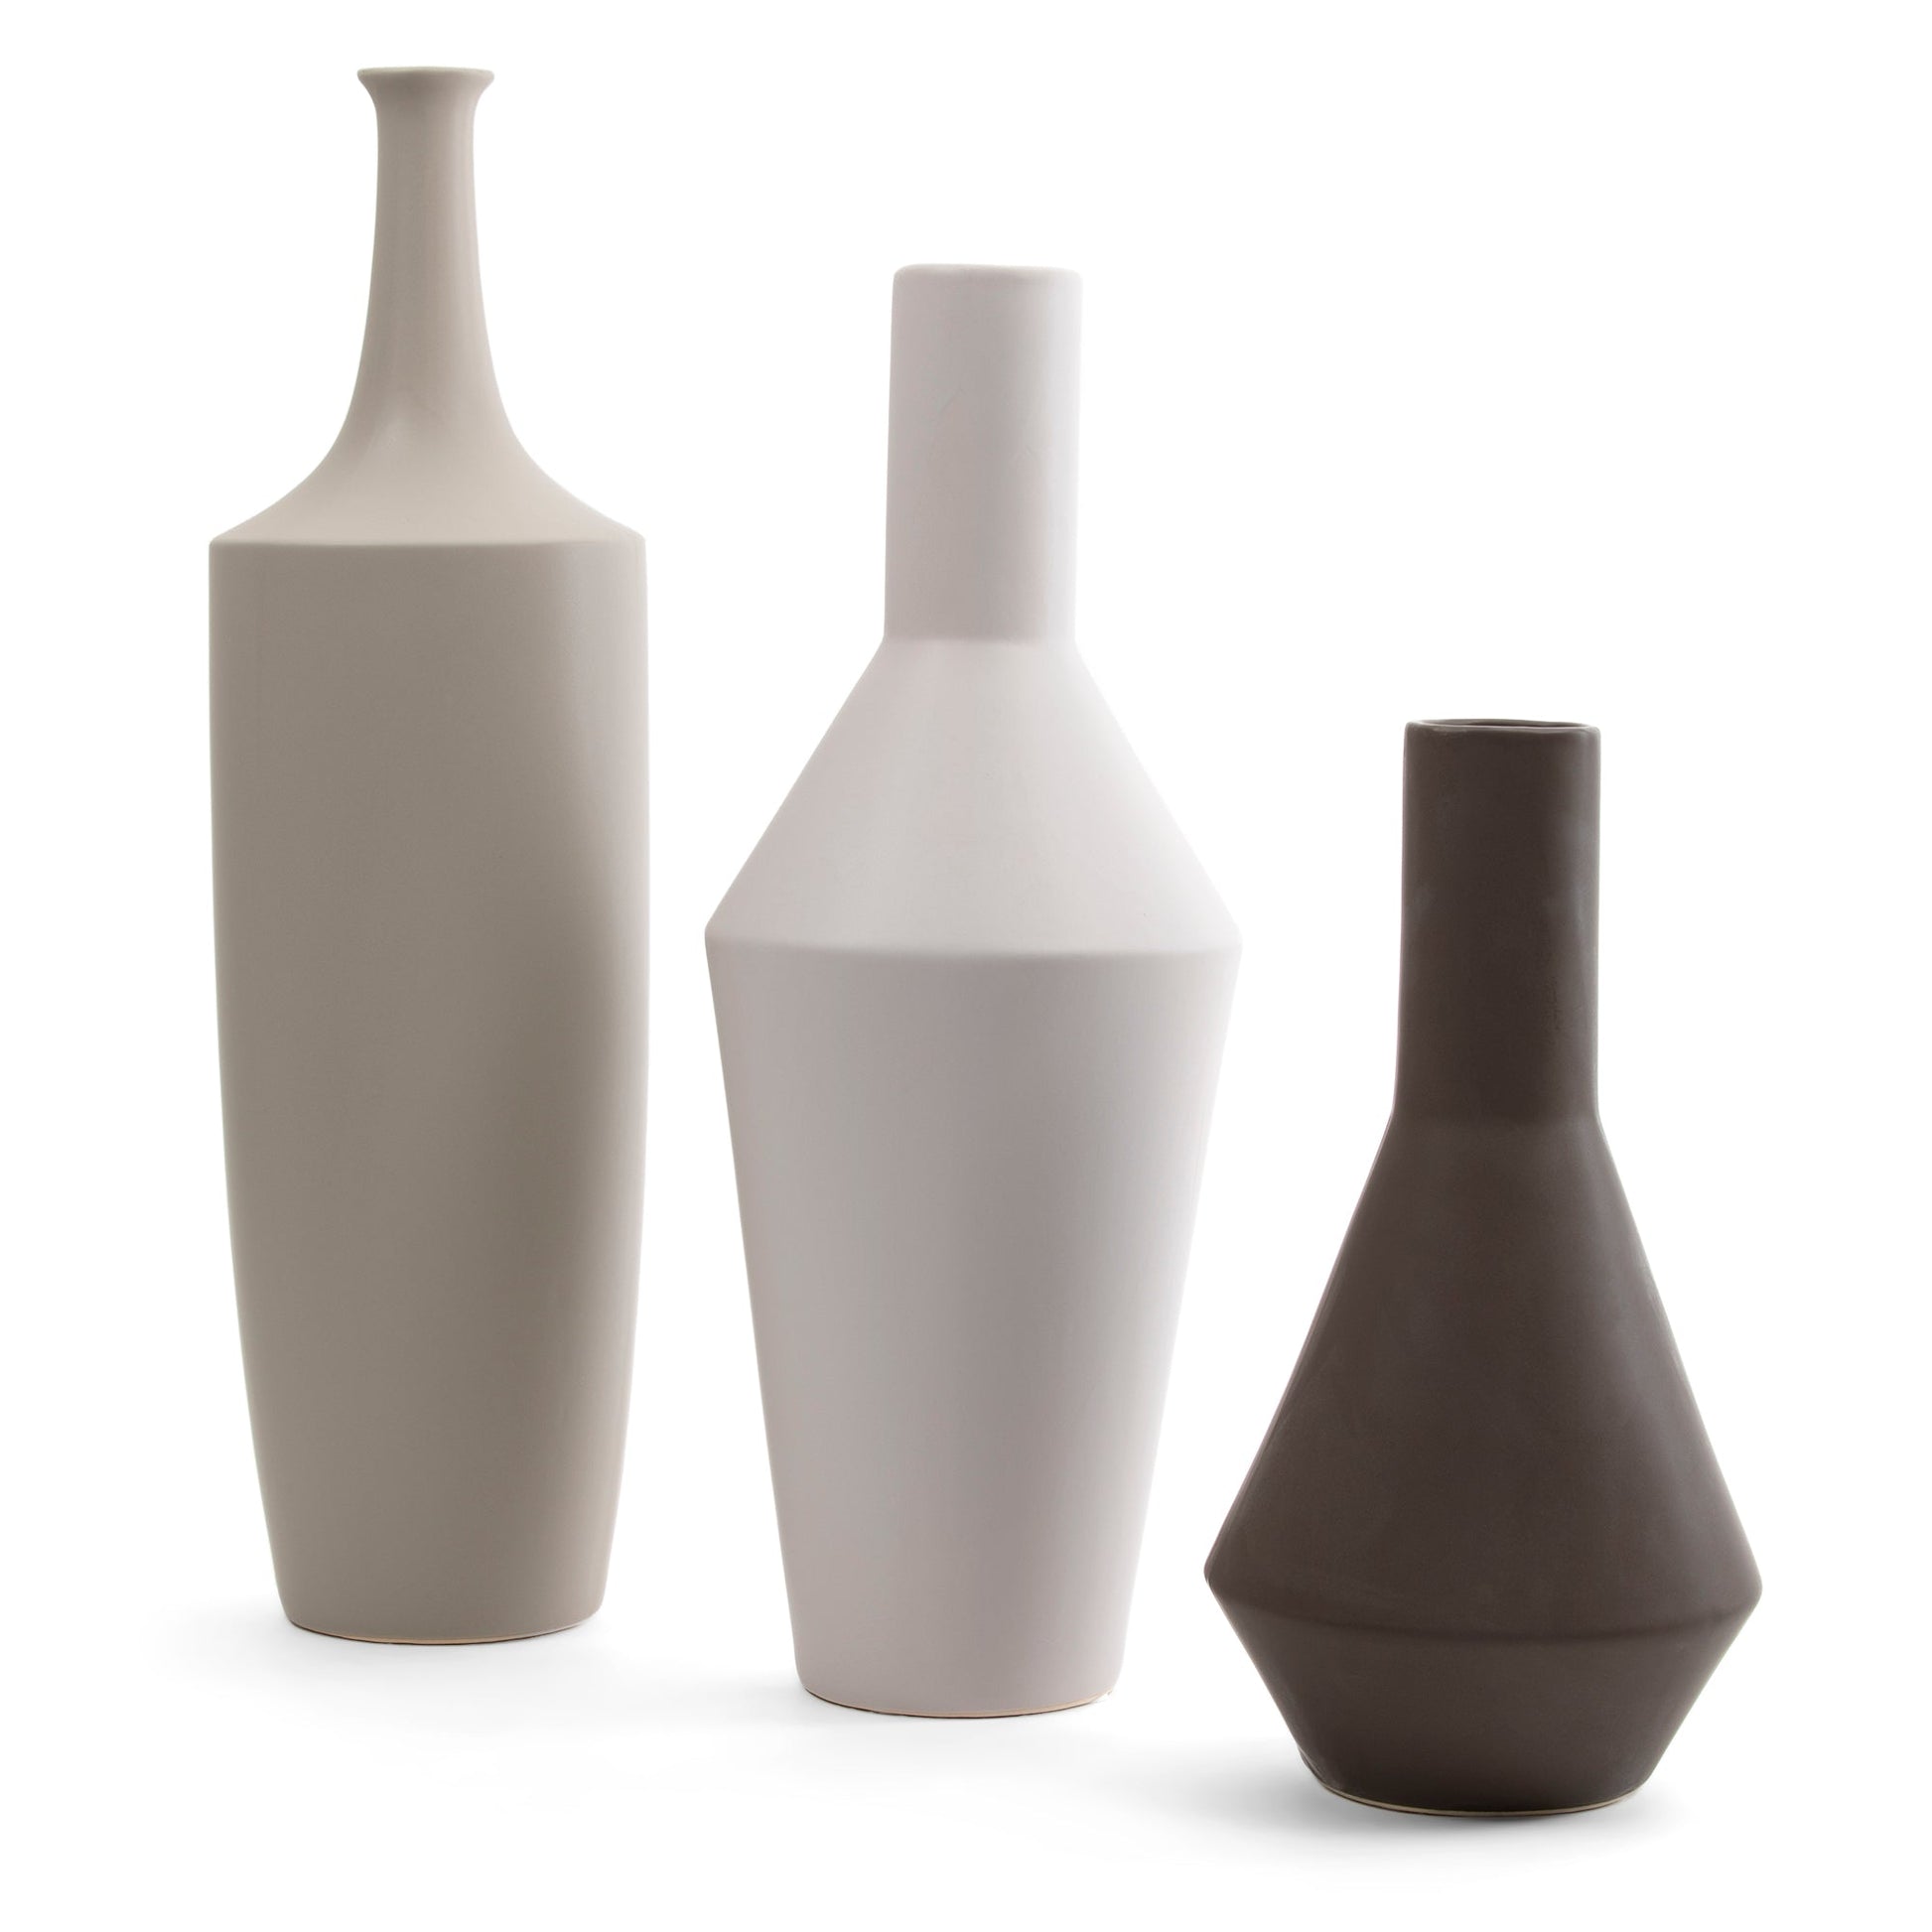 Crestview Collection Zen 24" & 20" & 15" 3-Piece Transitional Ceramic Japanese-Inspired Bottle In Taupe White and Charcoal Matte Glazed Ceramic Finish